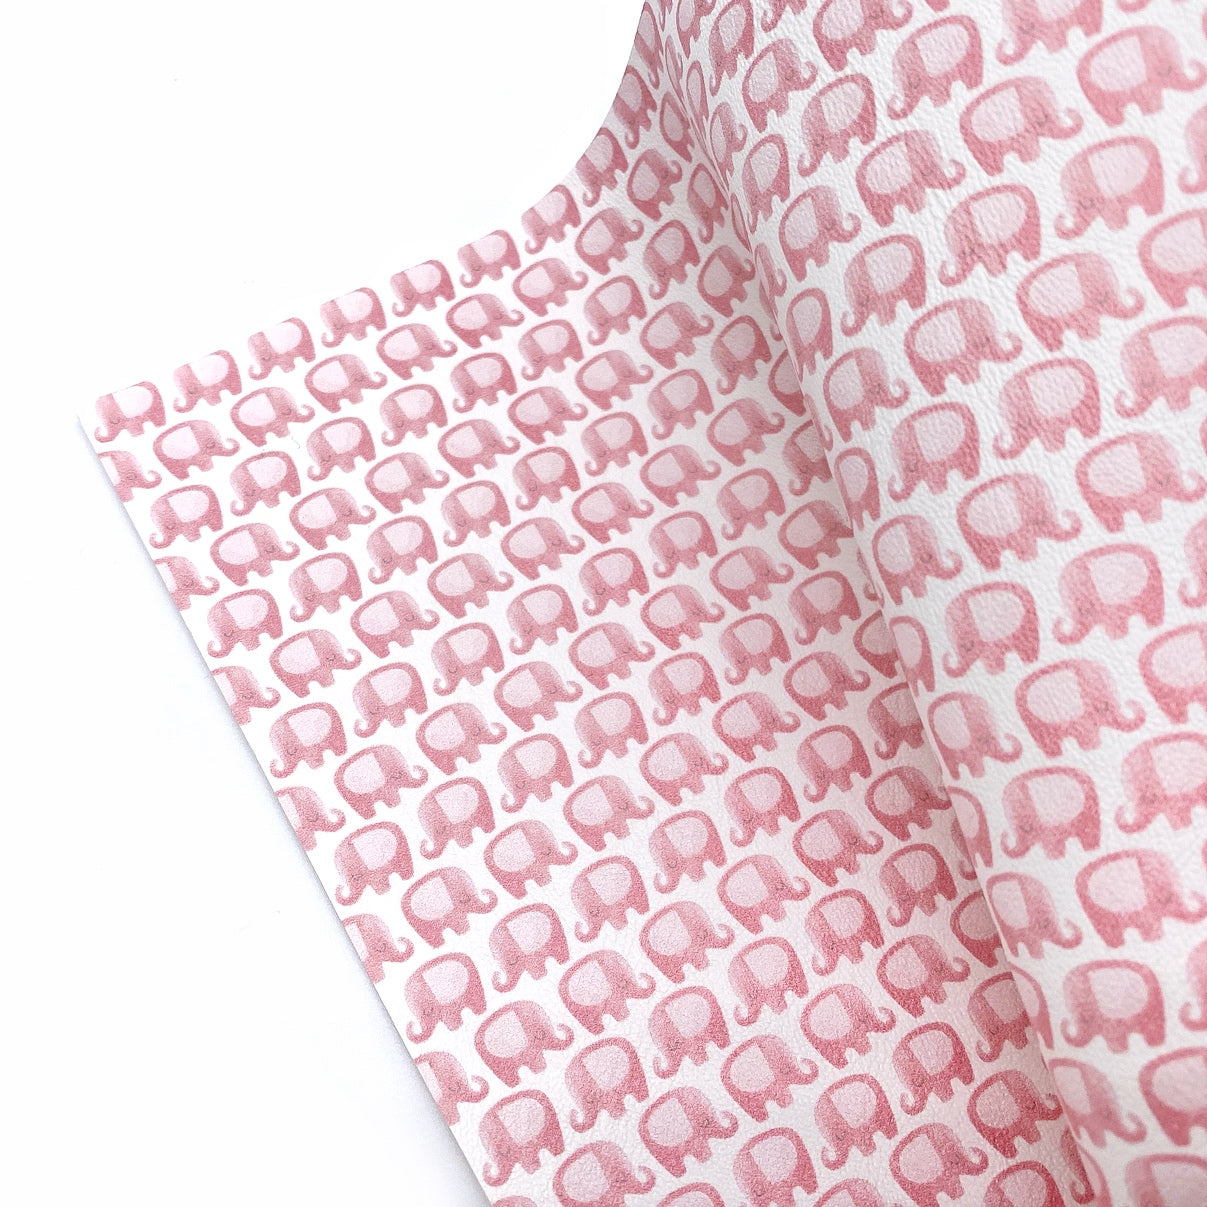 Pink Elephants Premium Faux Leather Fabric Sheets